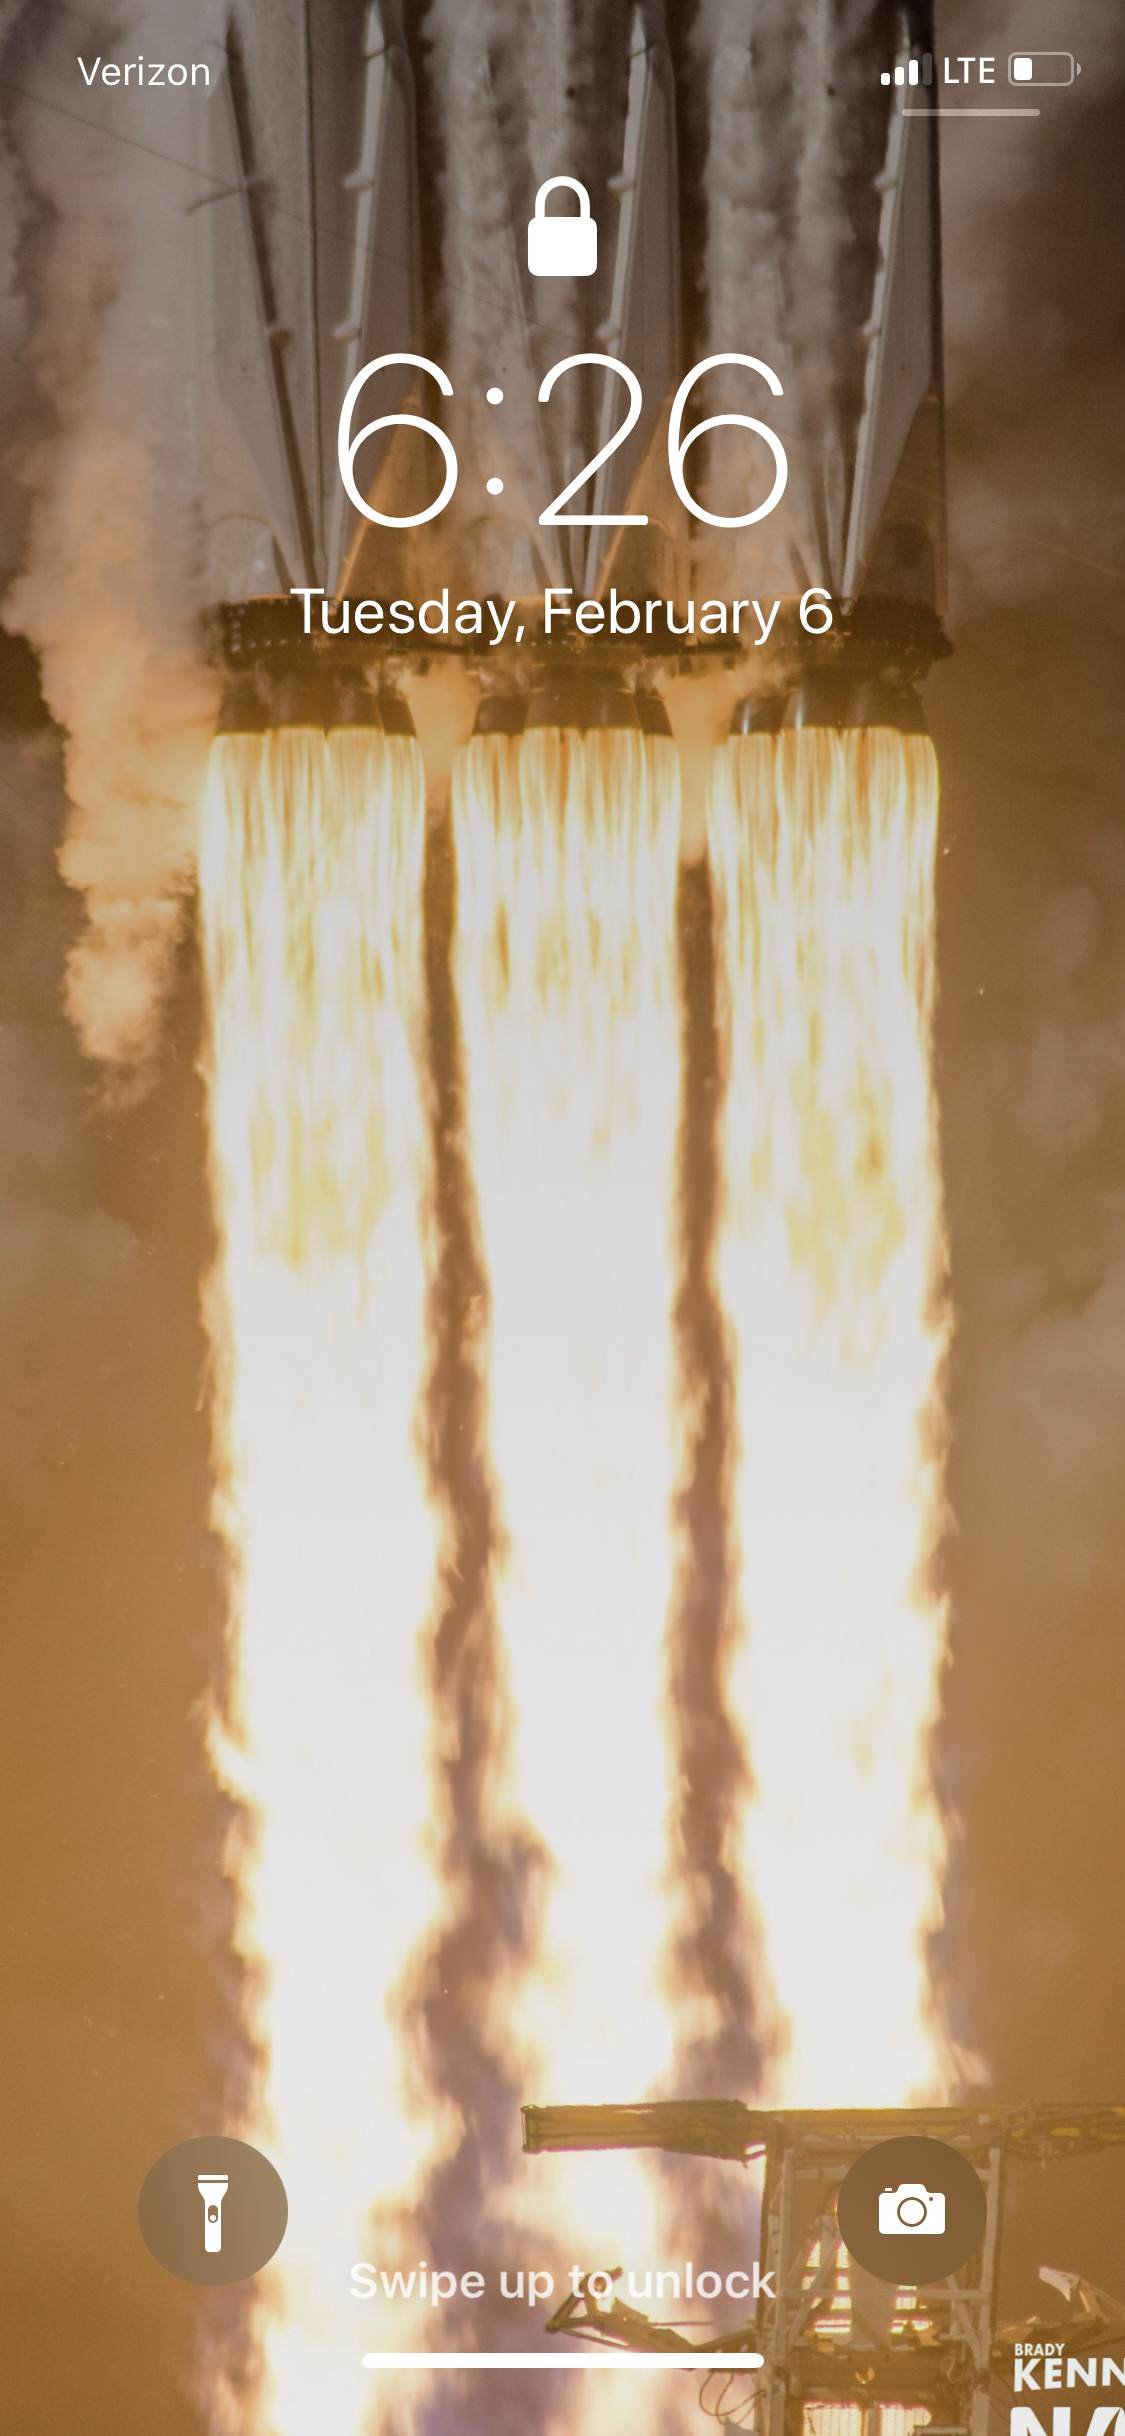 New Wallpaper for anyone who watched the Falcon Heavy